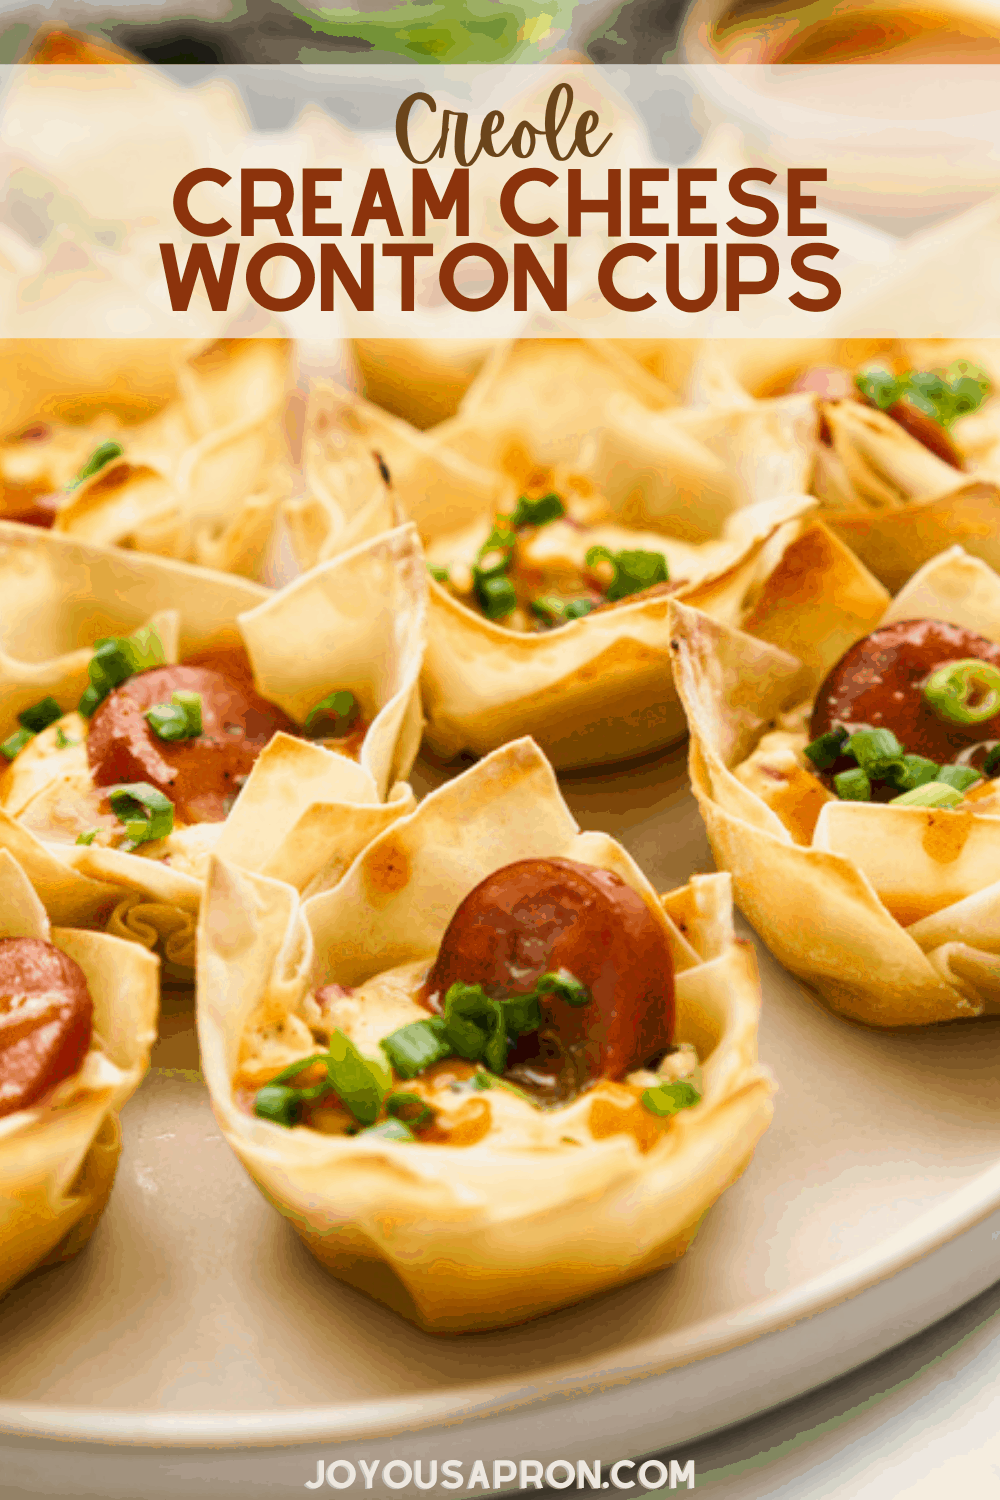 Creole Cream Cheese Wonton Cups - Mini bite sized Creole inspired crispy wonton cups filled with seasoned cream cheese mixture, sausage, green onions and drizzled with a tangy, zesty sauce! A fun twist to the classic cream cheese wontons. via @joyousapron